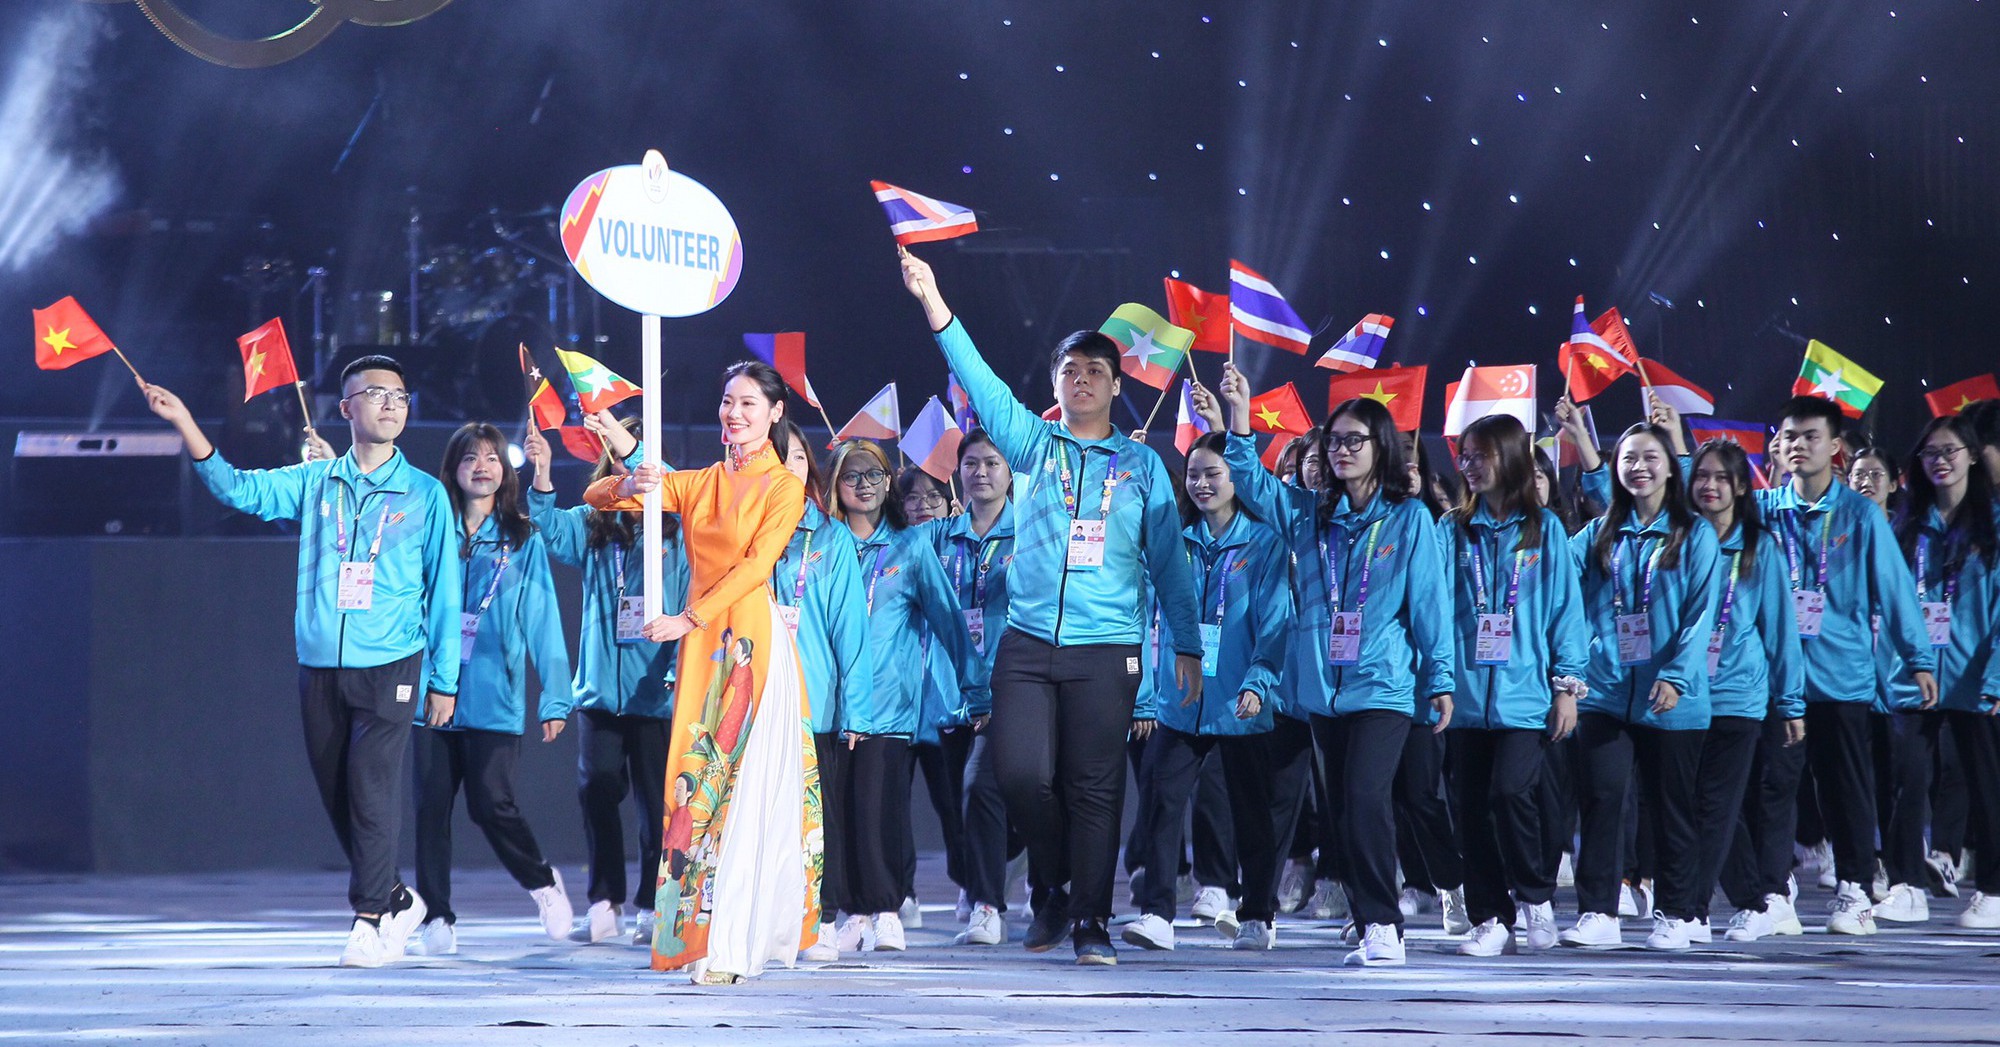 SEA Games 31 – Convergence to shine together